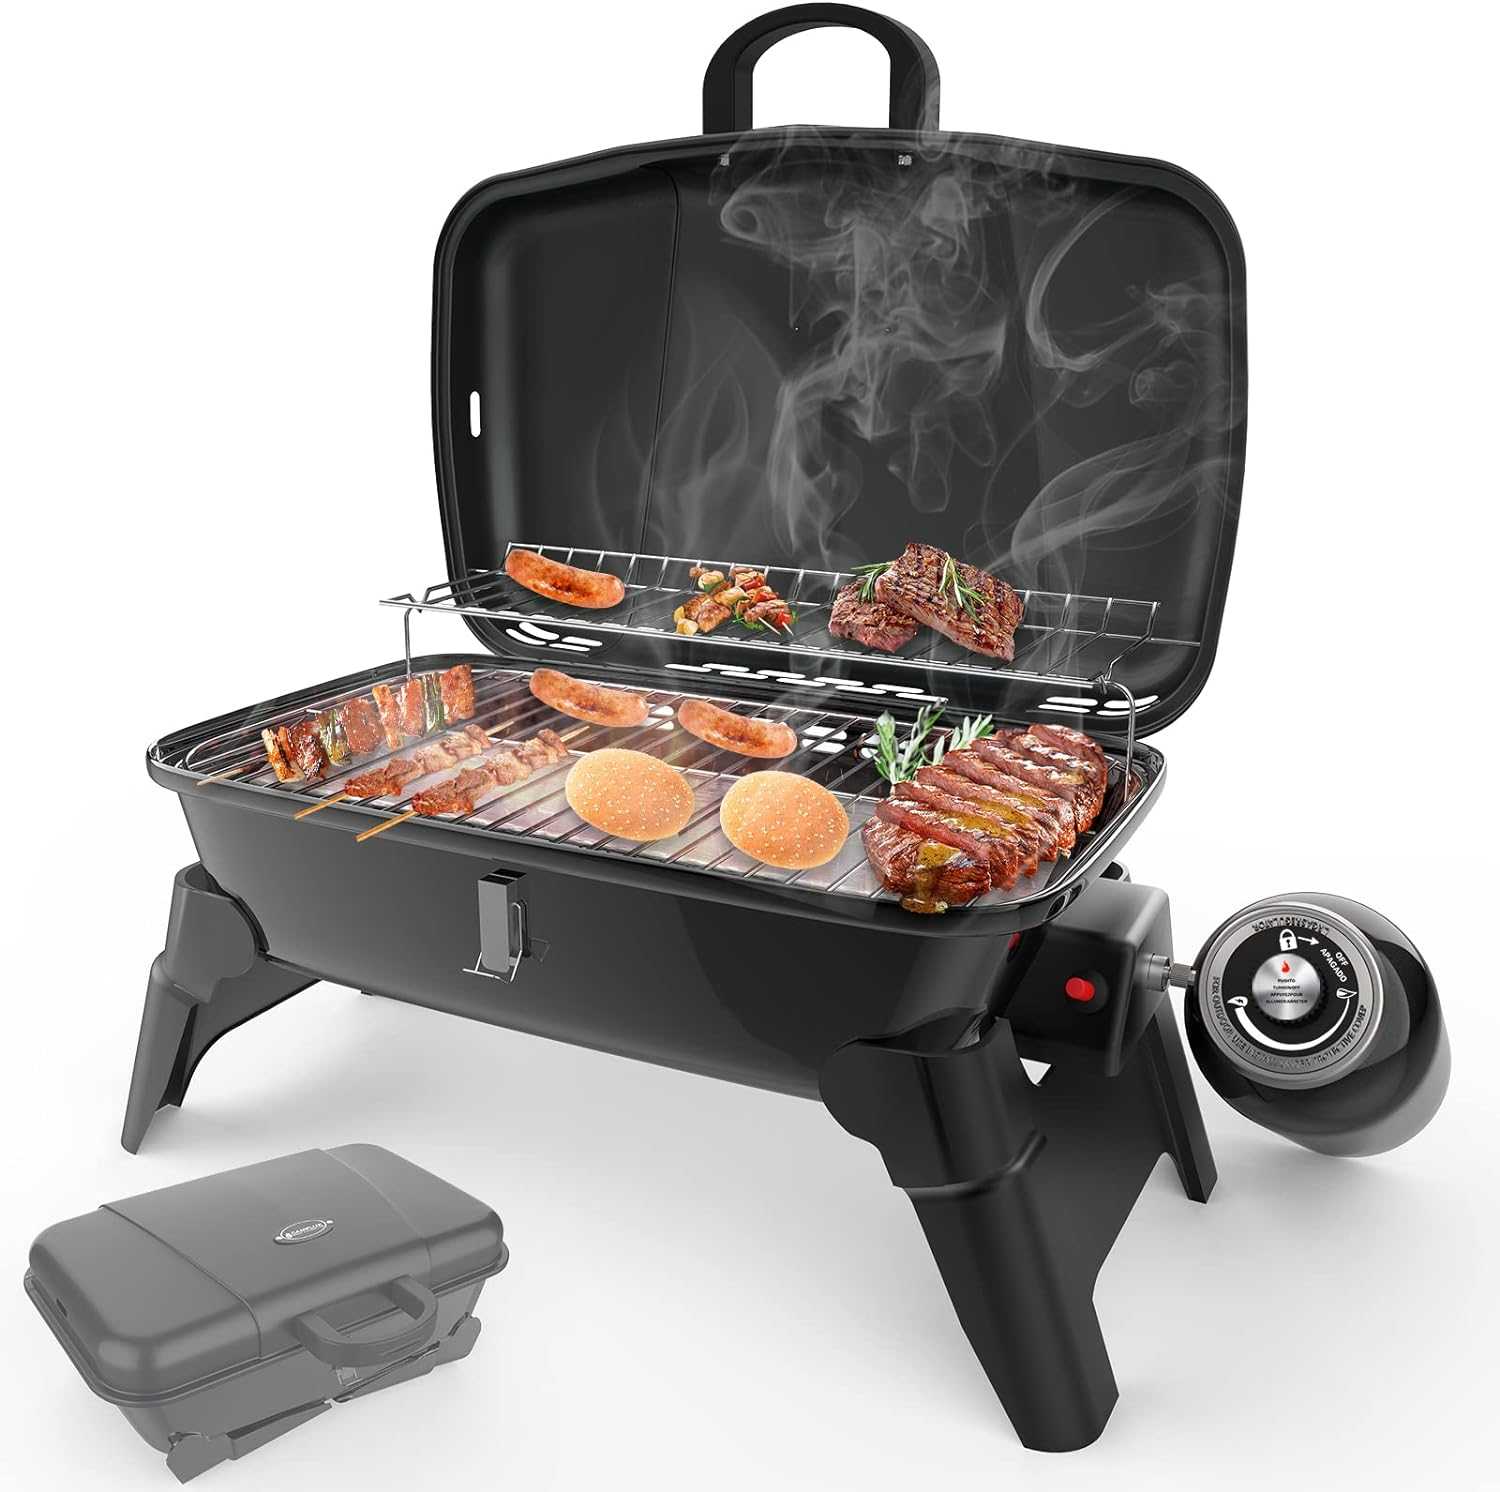 22 inch Propane 2 Burner Portable Table Top Griddle BBQ Grill with Hood for Outdoor Cooking Camping or Tailgating Etc, Kit with Carry Bag